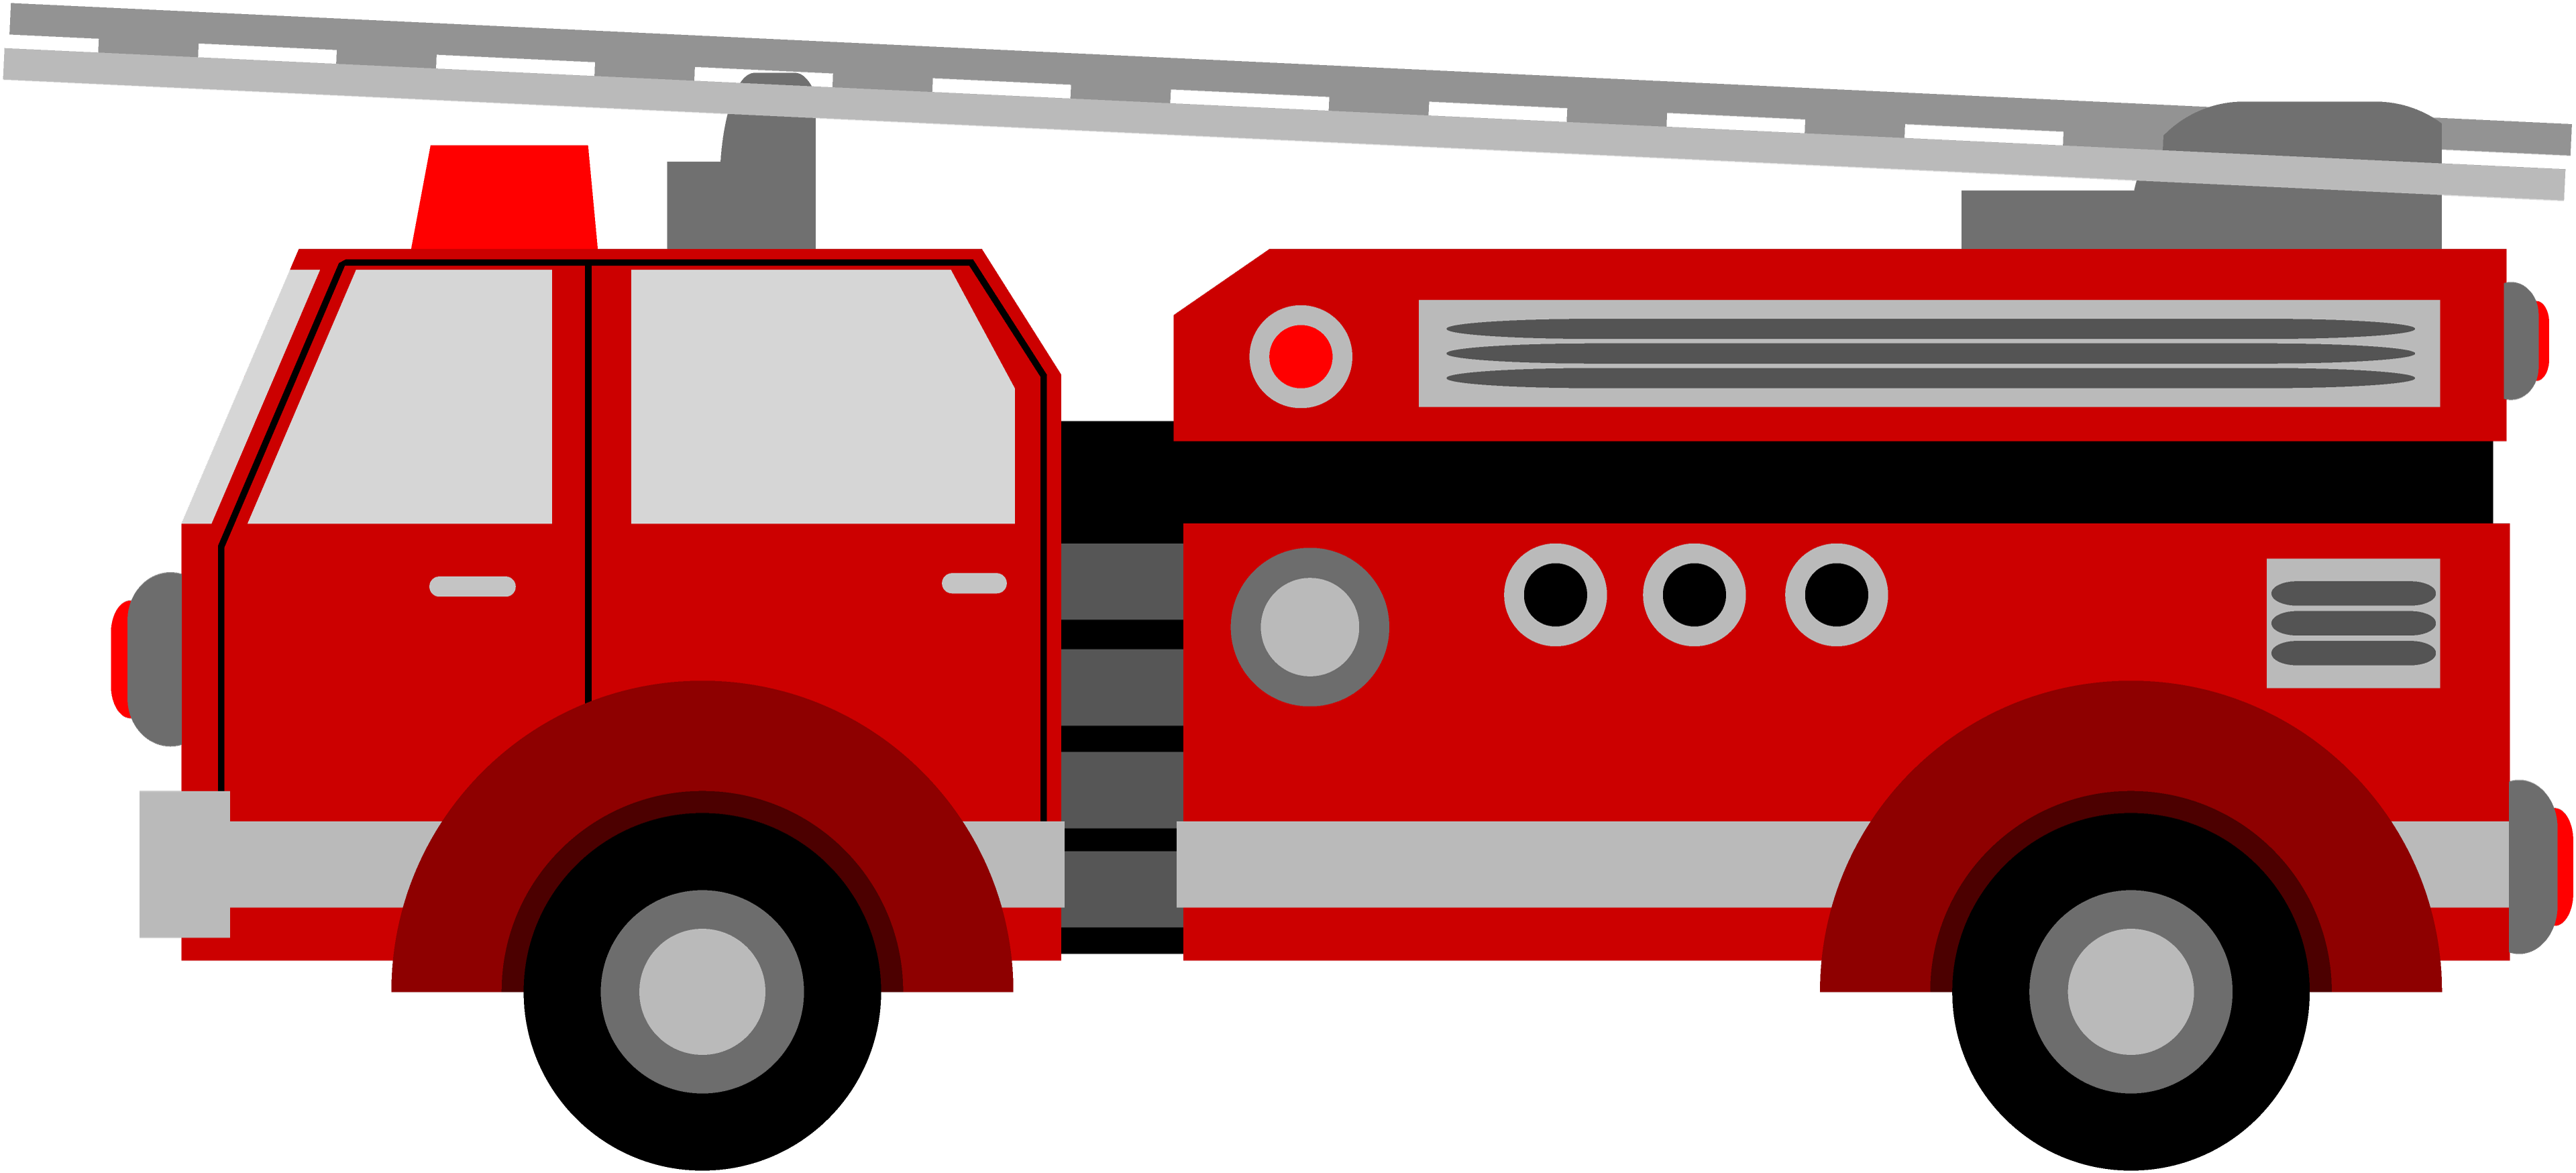 3840x1749 - Fire truck engine for kids. 